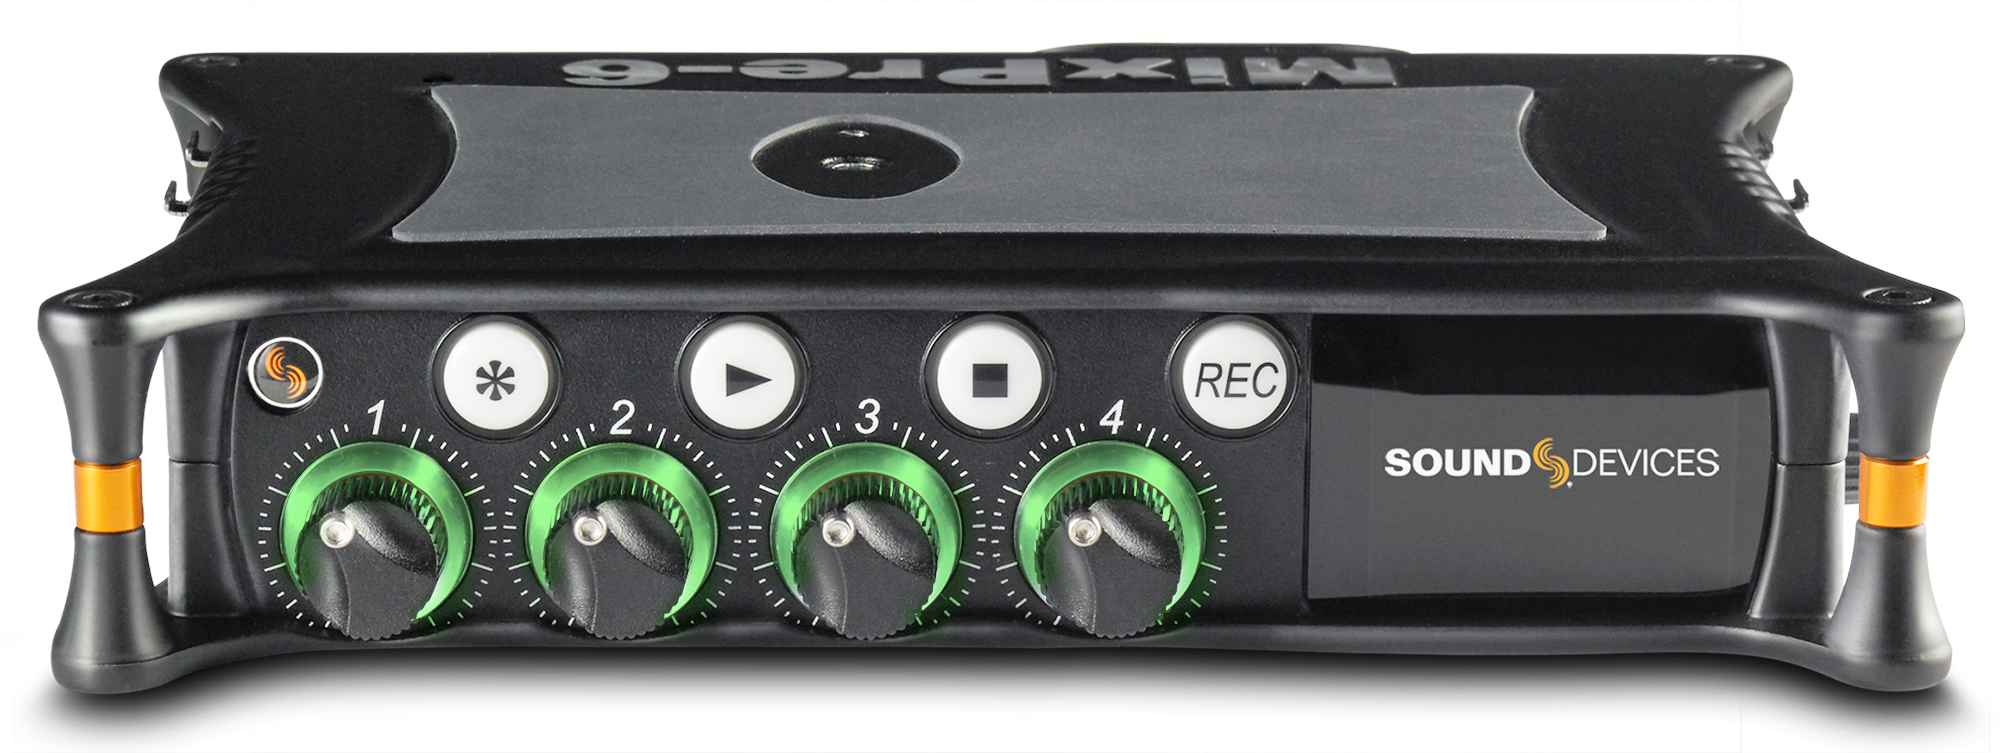 Review: MixPre-3 audio recorder/mixer from Sound Devices 62